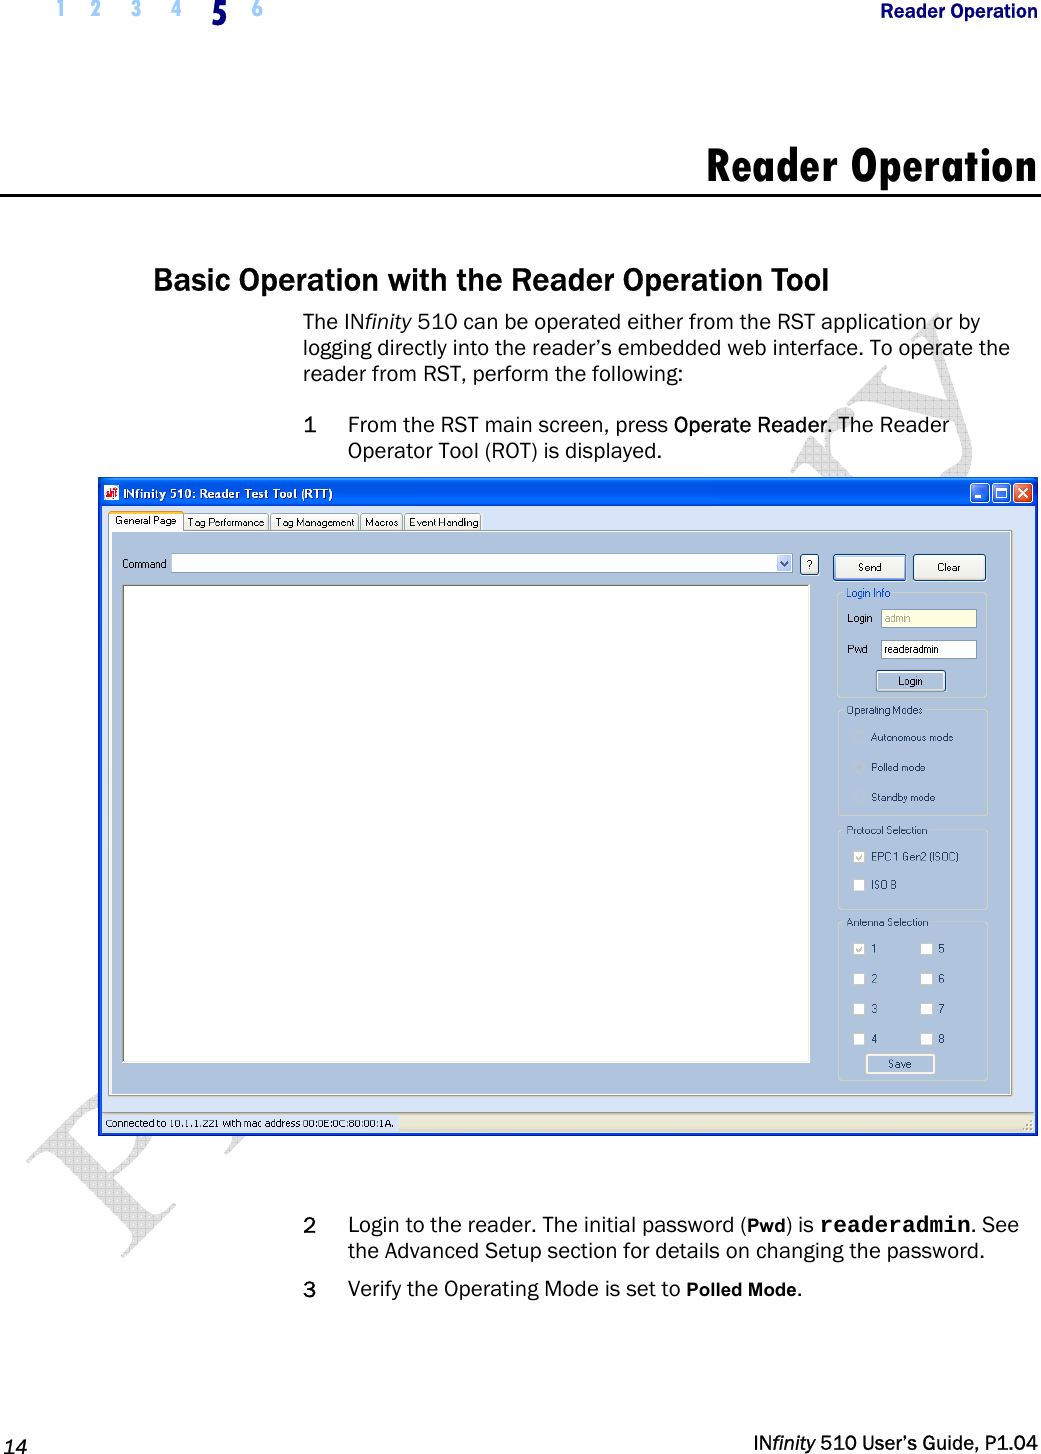  1 2  3  4  5  6           Reader Operation   14   INfinity 510 User’s Guide, P1.04  Reader Operation  Basic Operation with the Reader Operation Tool The INfinity 510 can be operated either from the RST application or by logging directly into the reader’s embedded web interface. To operate the reader from RST, perform the following: 1 From the RST main screen, press Operate Reader. The Reader Operator Tool (ROT) is displayed.   2 Login to the reader. The initial password (Pwd) is readeradmin. See the Advanced Setup section for details on changing the password. 3 Verify the Operating Mode is set to Polled Mode. 